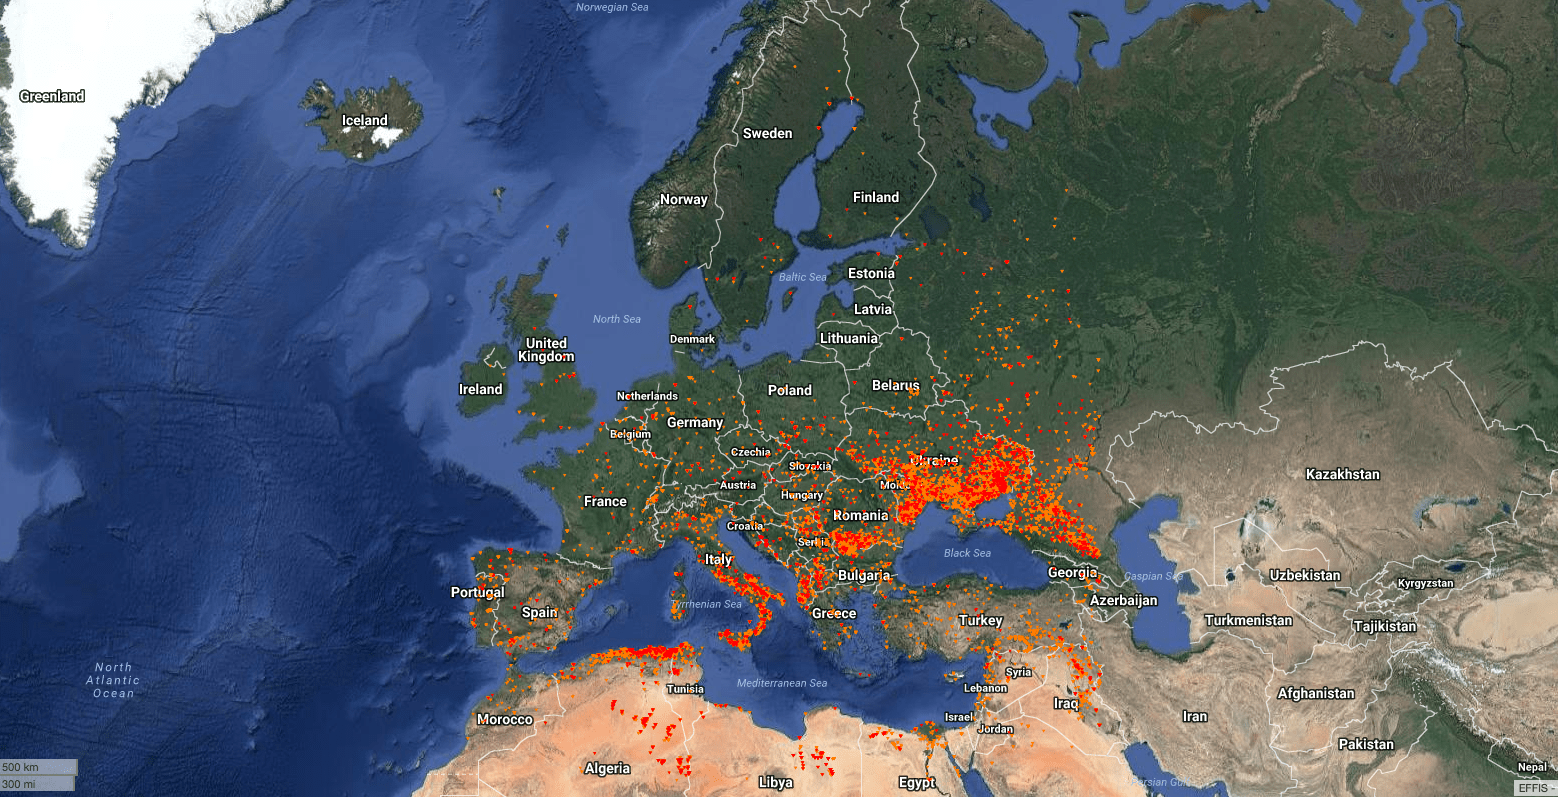 European Union, current situation wildfires. You can [click here](https://effis.jrc.ec.europa.eu/static/effis_current_situation/public/index.html) to use the interactive version.